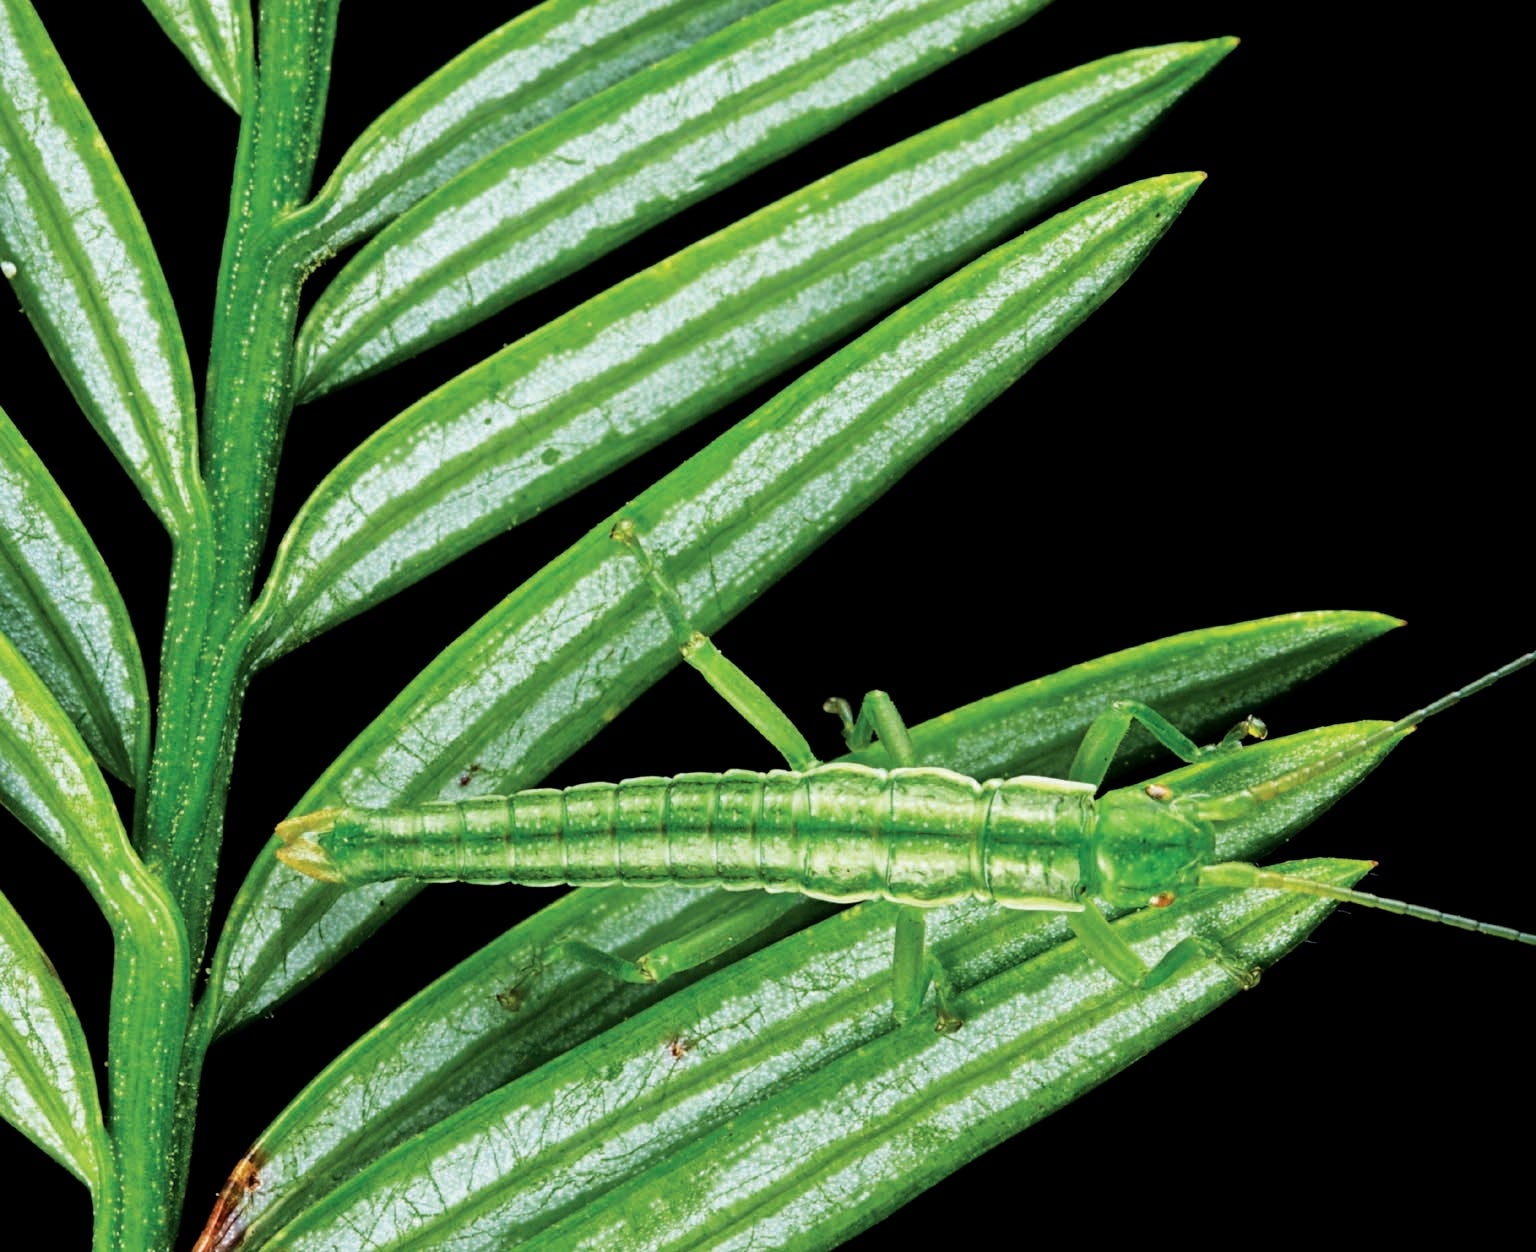 These Male Stick Insects Aren't 'Errors' After All